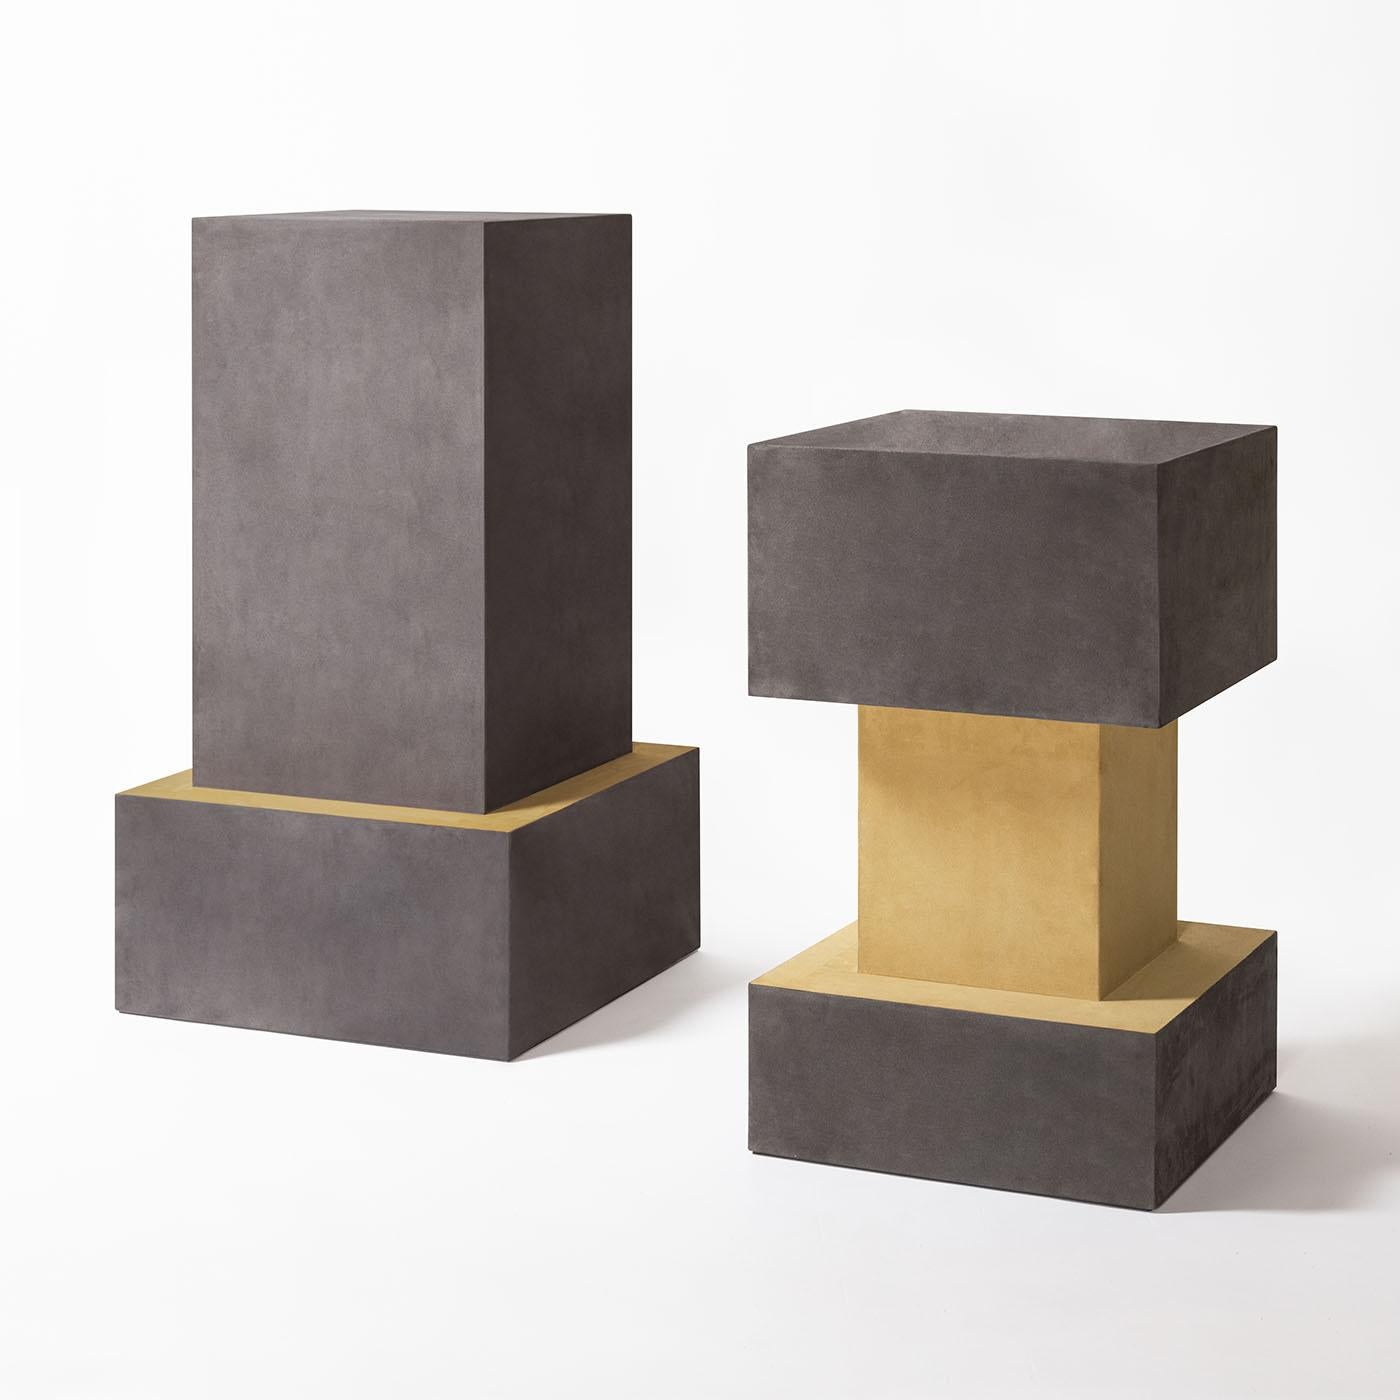 The Ara plinths boast primal monolithic volumes with rigorously geometric lines which make them able to enhance anything on display and to be solid statement pieces themeselves designed by Simone Fanciullacci. It has a leather-covered wood